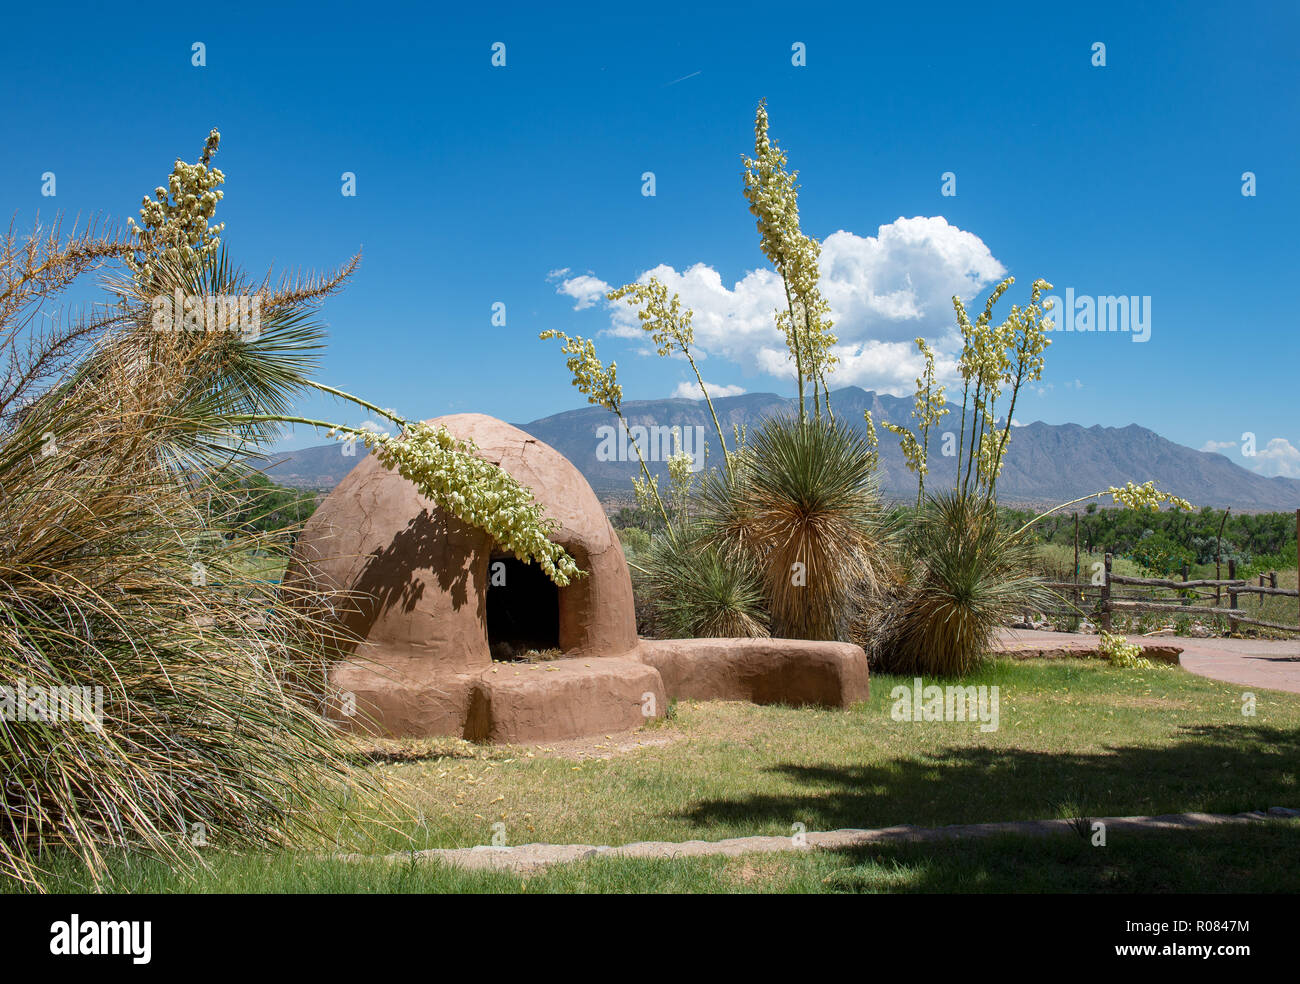 Southwestern Scene, Horno Adobe Clay Oven with Tall Yucca Blooms, Blue Sky, Clouds  and Mountains. Stock Photo